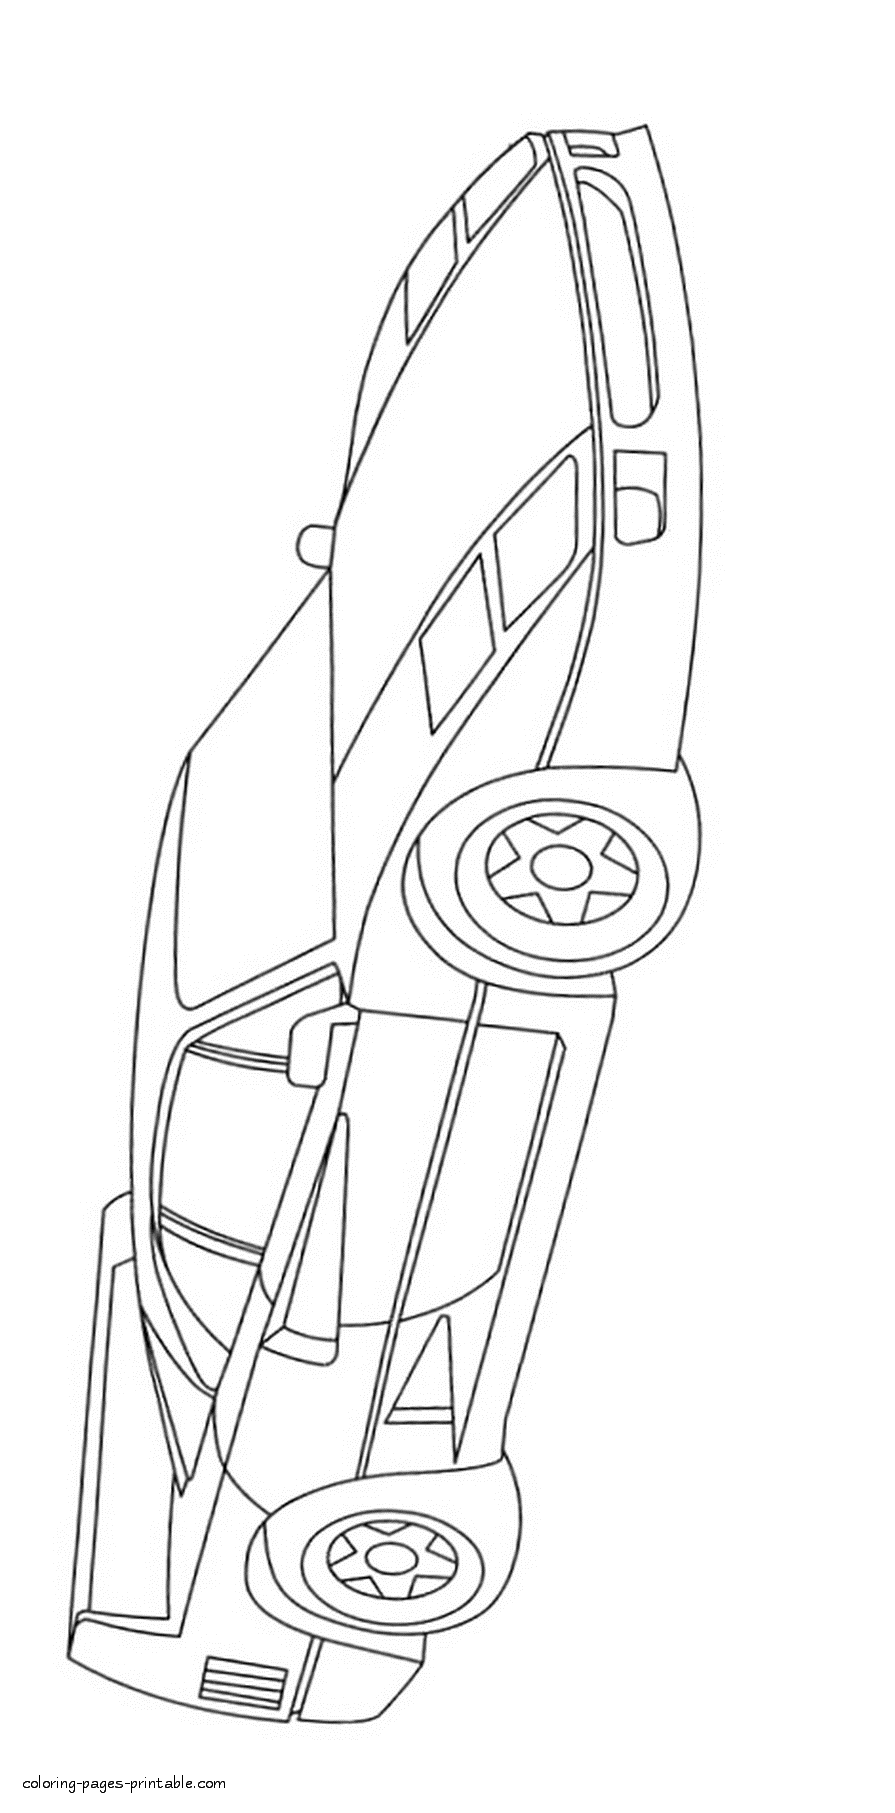 Ferrari F40. Legendary sports cars coloring pages